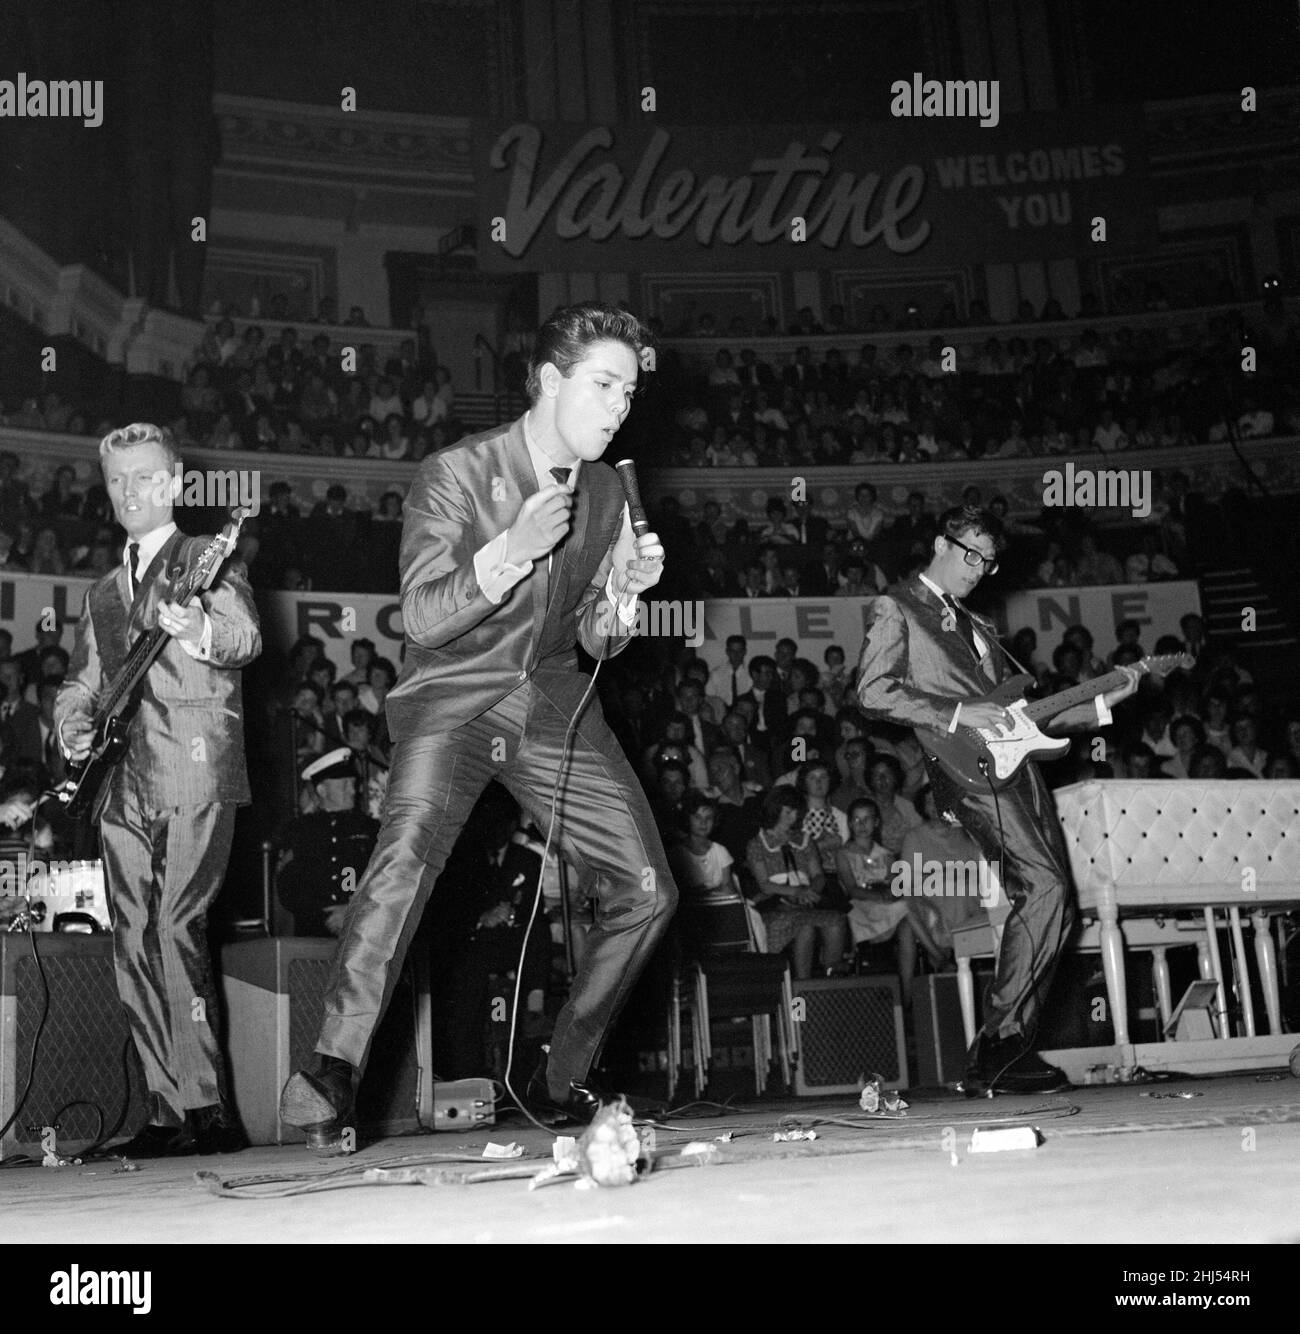 Pop concert at the Royal Albert Hall presented by Roxy, Marilyn and Valentine magazines to thousands of youngsters, attended by acts such as Adam Faith and Cliff Richard with his group The Shadows . Pictured performing are Cliff Richard and the Shadows with Hank Marvin on guitar (right). 18th September 1960. Stock Photo